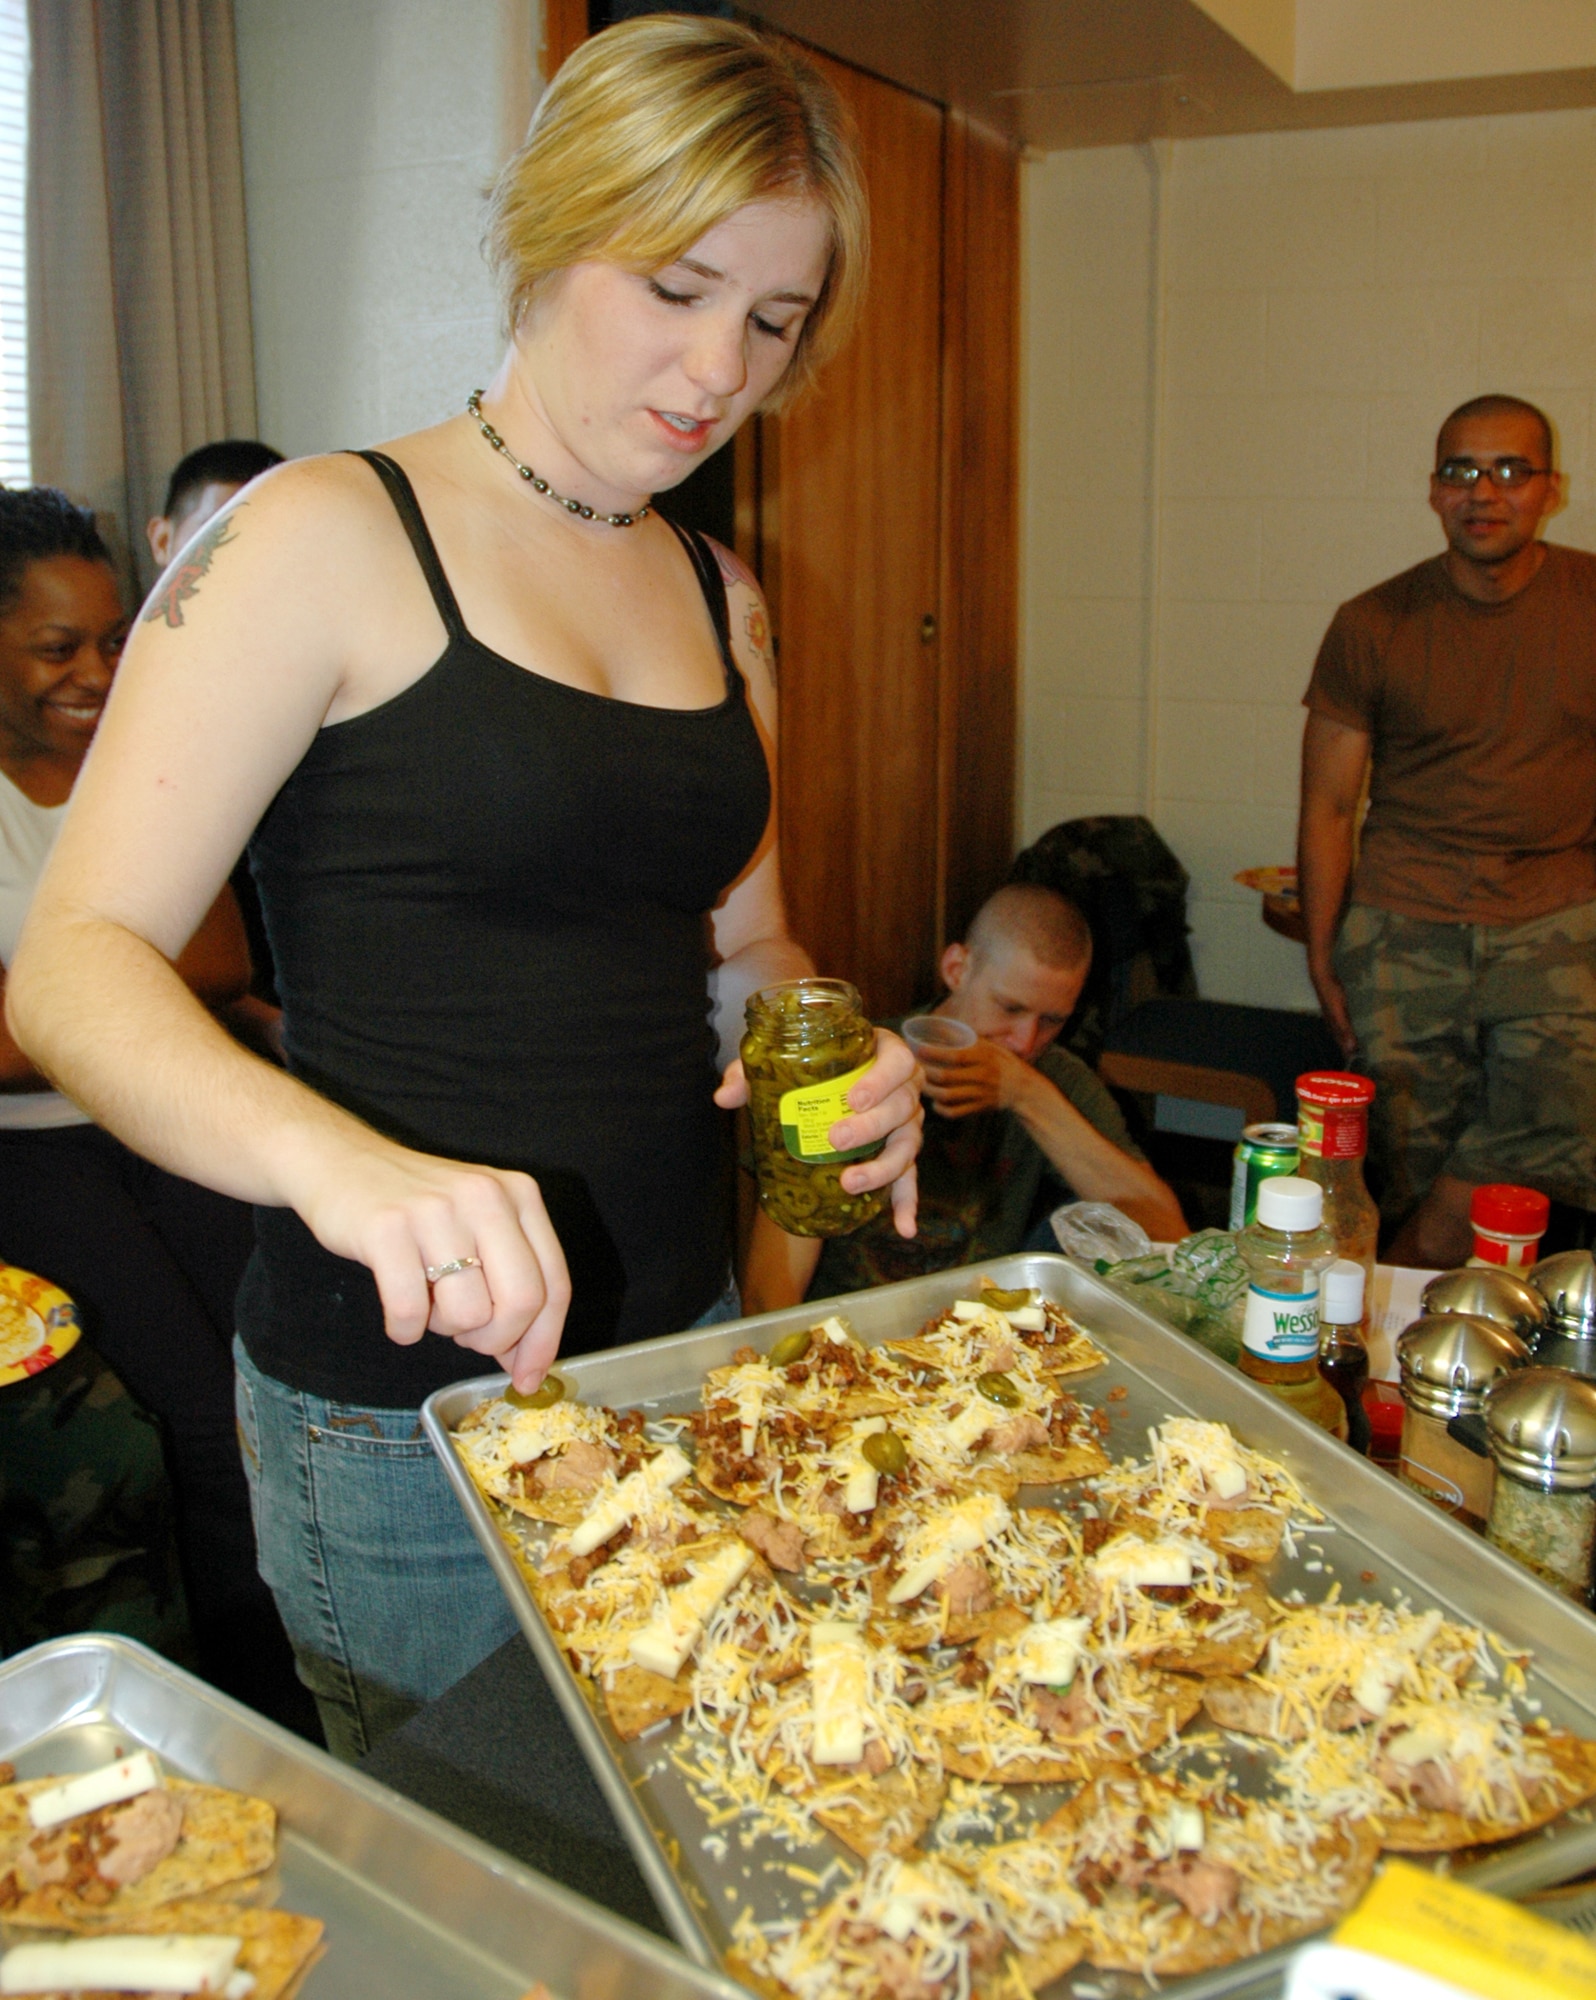 Airman 1st Class Marleah Miller, 844th Communications Group, adds the finishing touch to the “macho nachos,” one of the several Mexican-American dishes prepared July 31 during a dormitory cooking class at Blanchard Barracks. (U.S. Air Force photo by Airman 1st Class R. Michael Longoria)